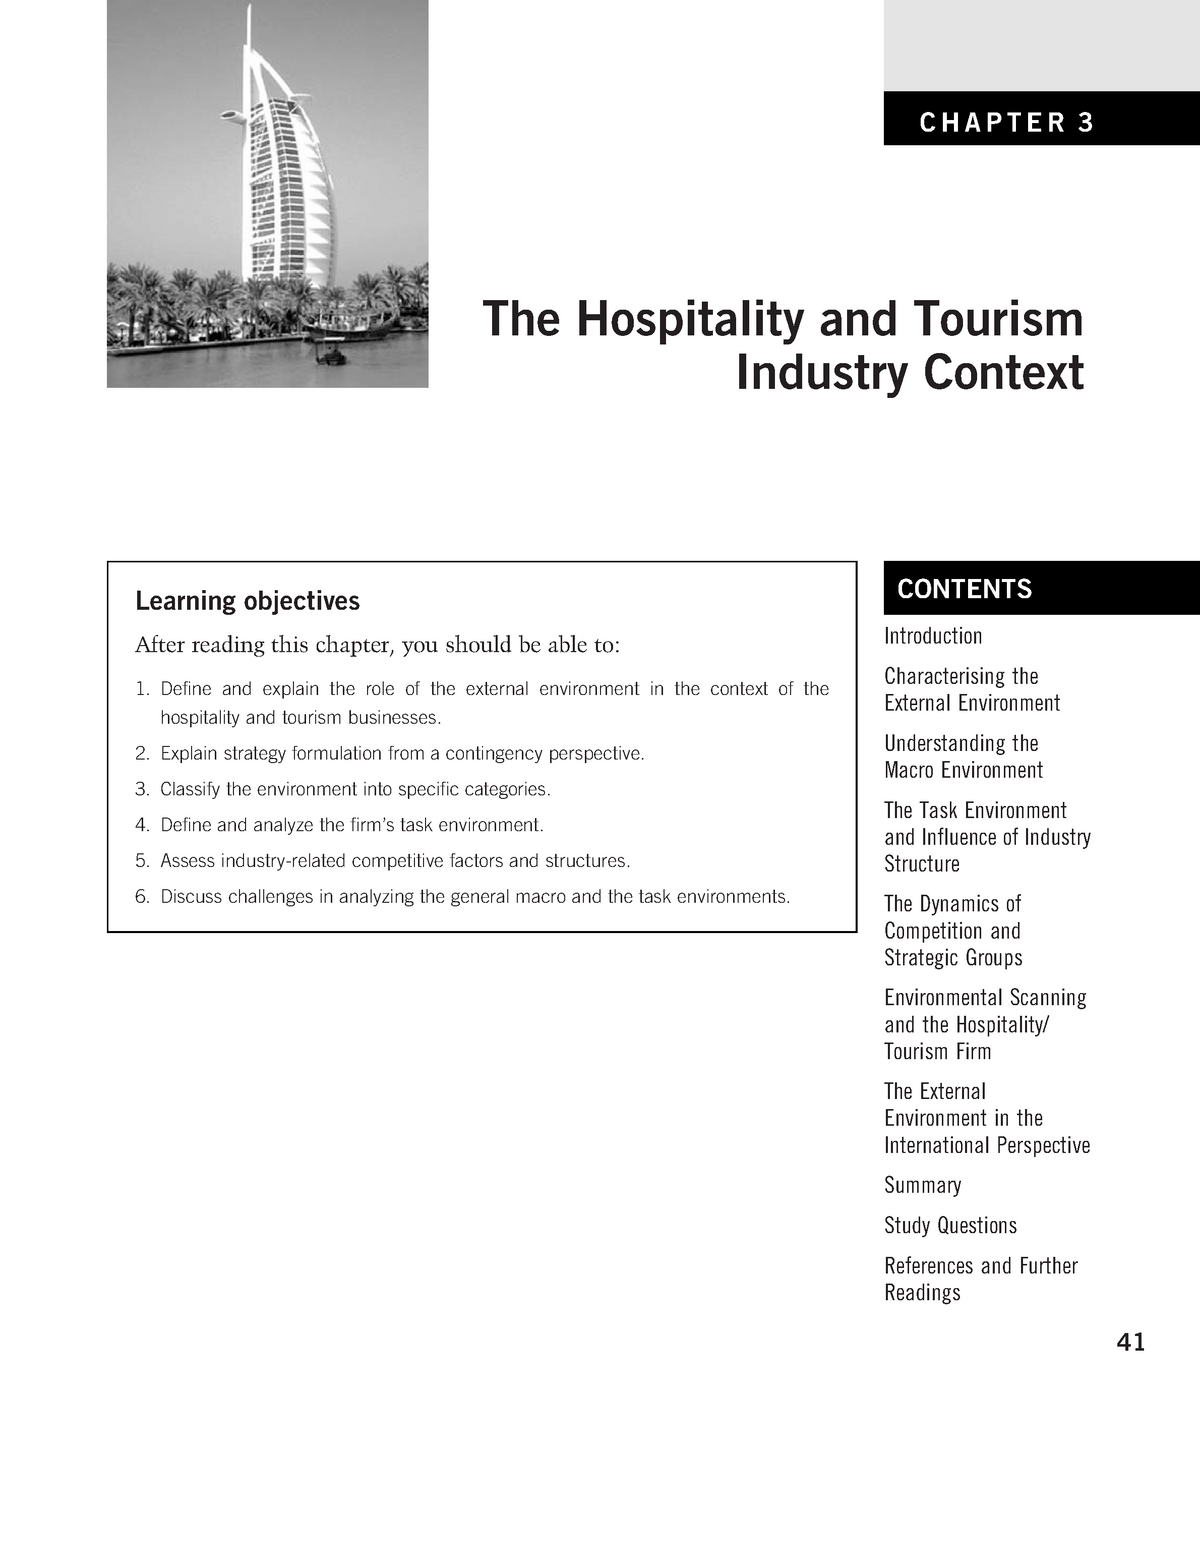 thesis title about tourism and hospitality